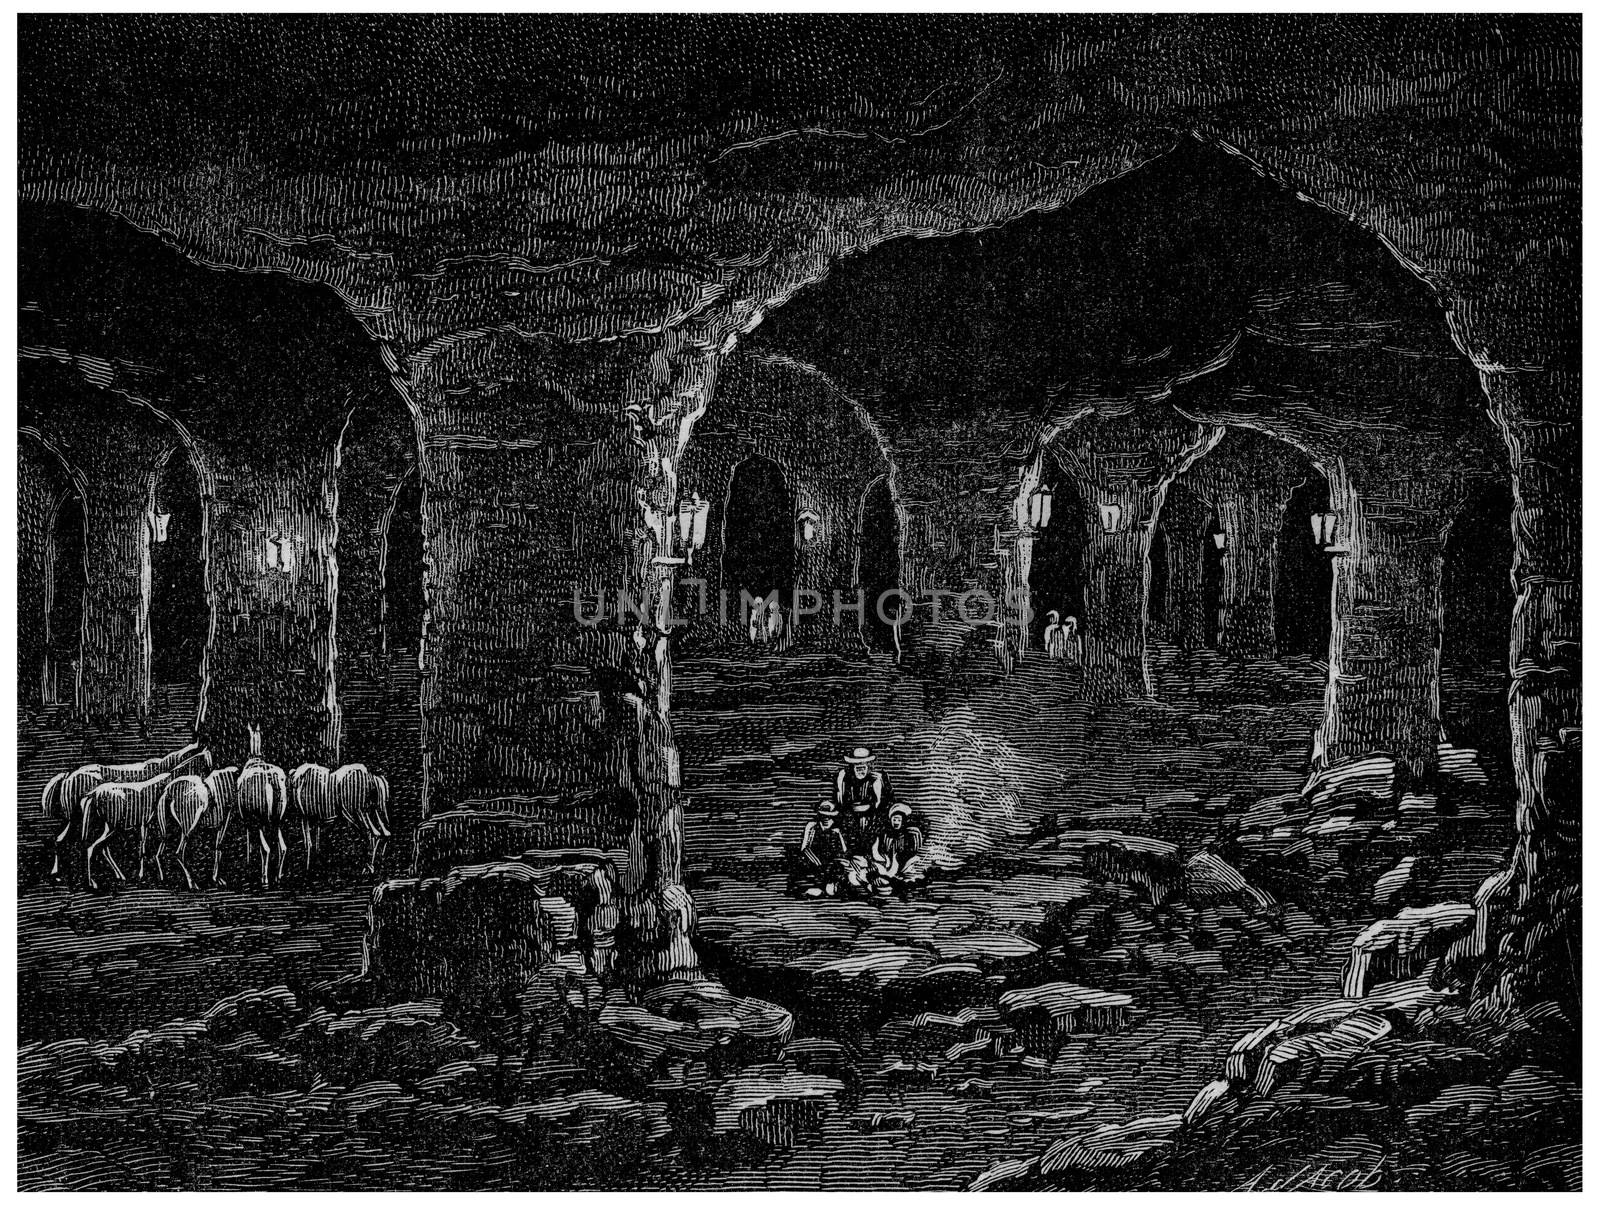 The Triassic formation, Wieliczka salt mines in Poland, vintage engraved illustration. Earth before man – 1886.